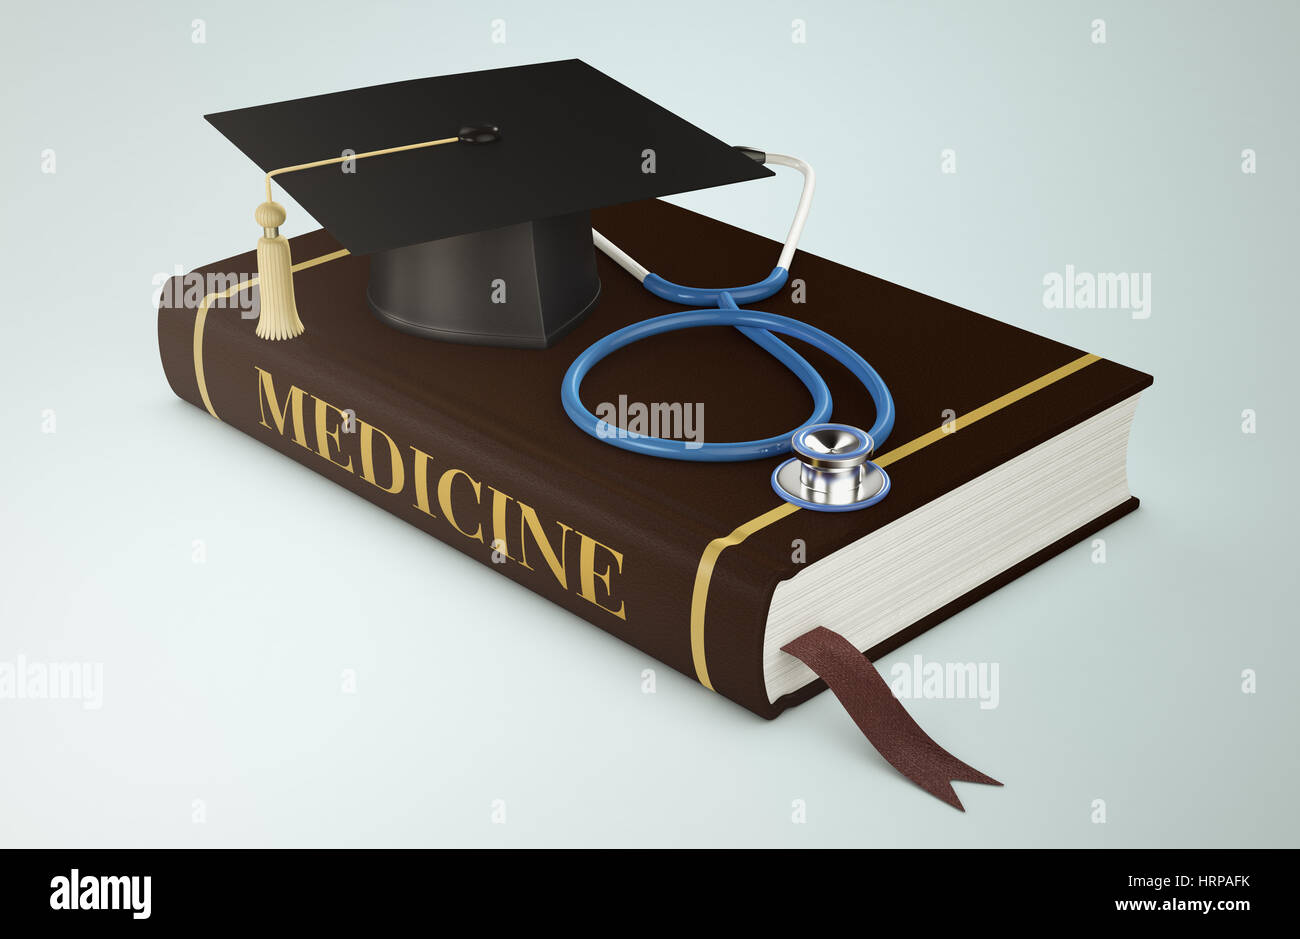 Table of medical student with books and stethoscope. by Pázsint Dalma.  Photo stock - StudioNow